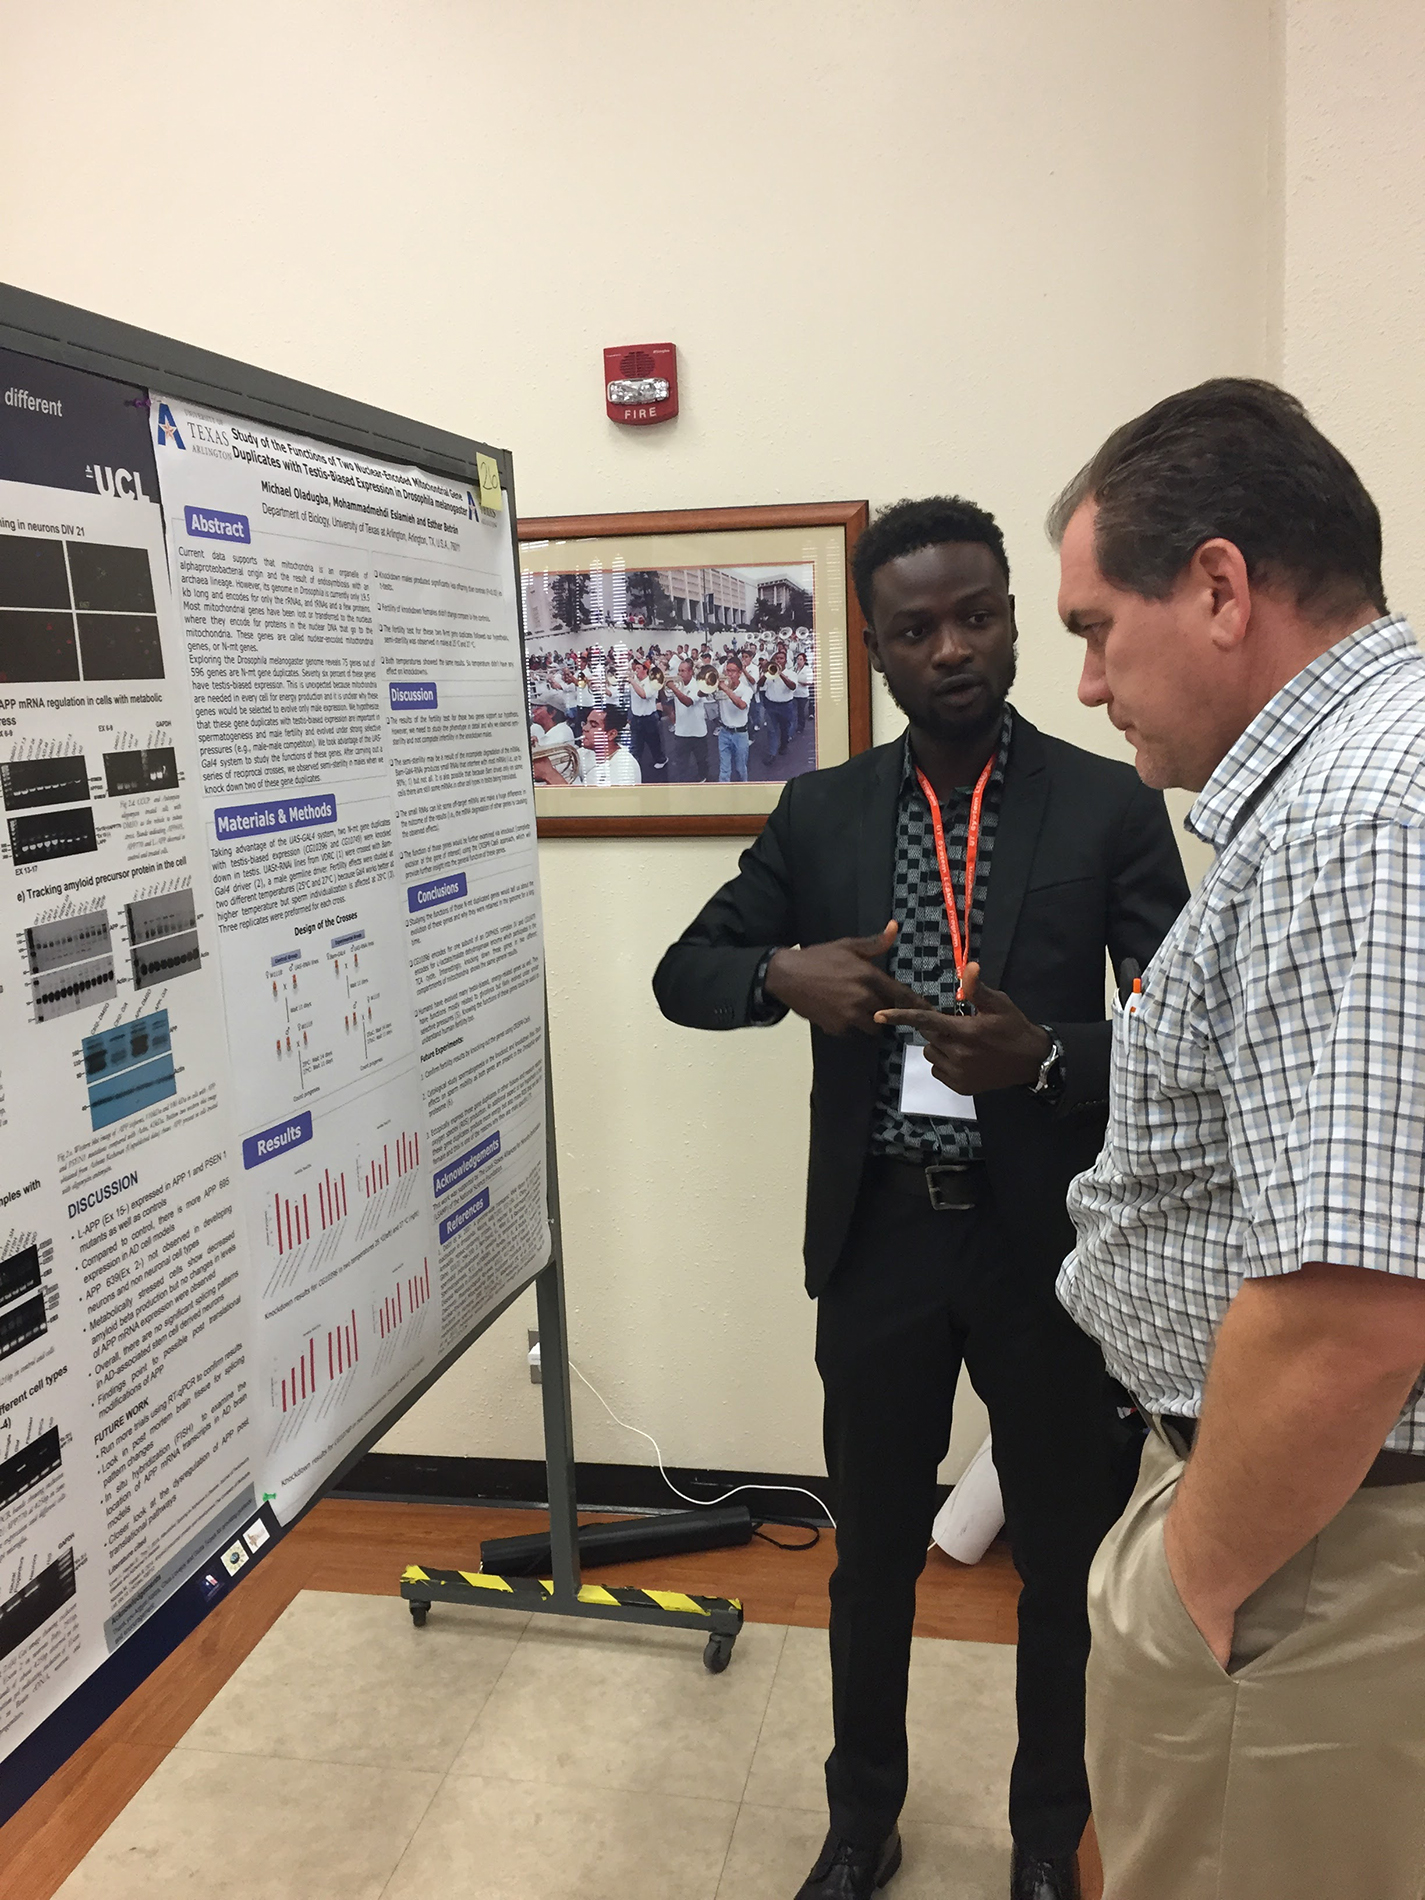 Former SE student Temidayo Oladugba talks about his poster presentation at the Louis Stokes Alliance for Minority Participation conference in El Paso.